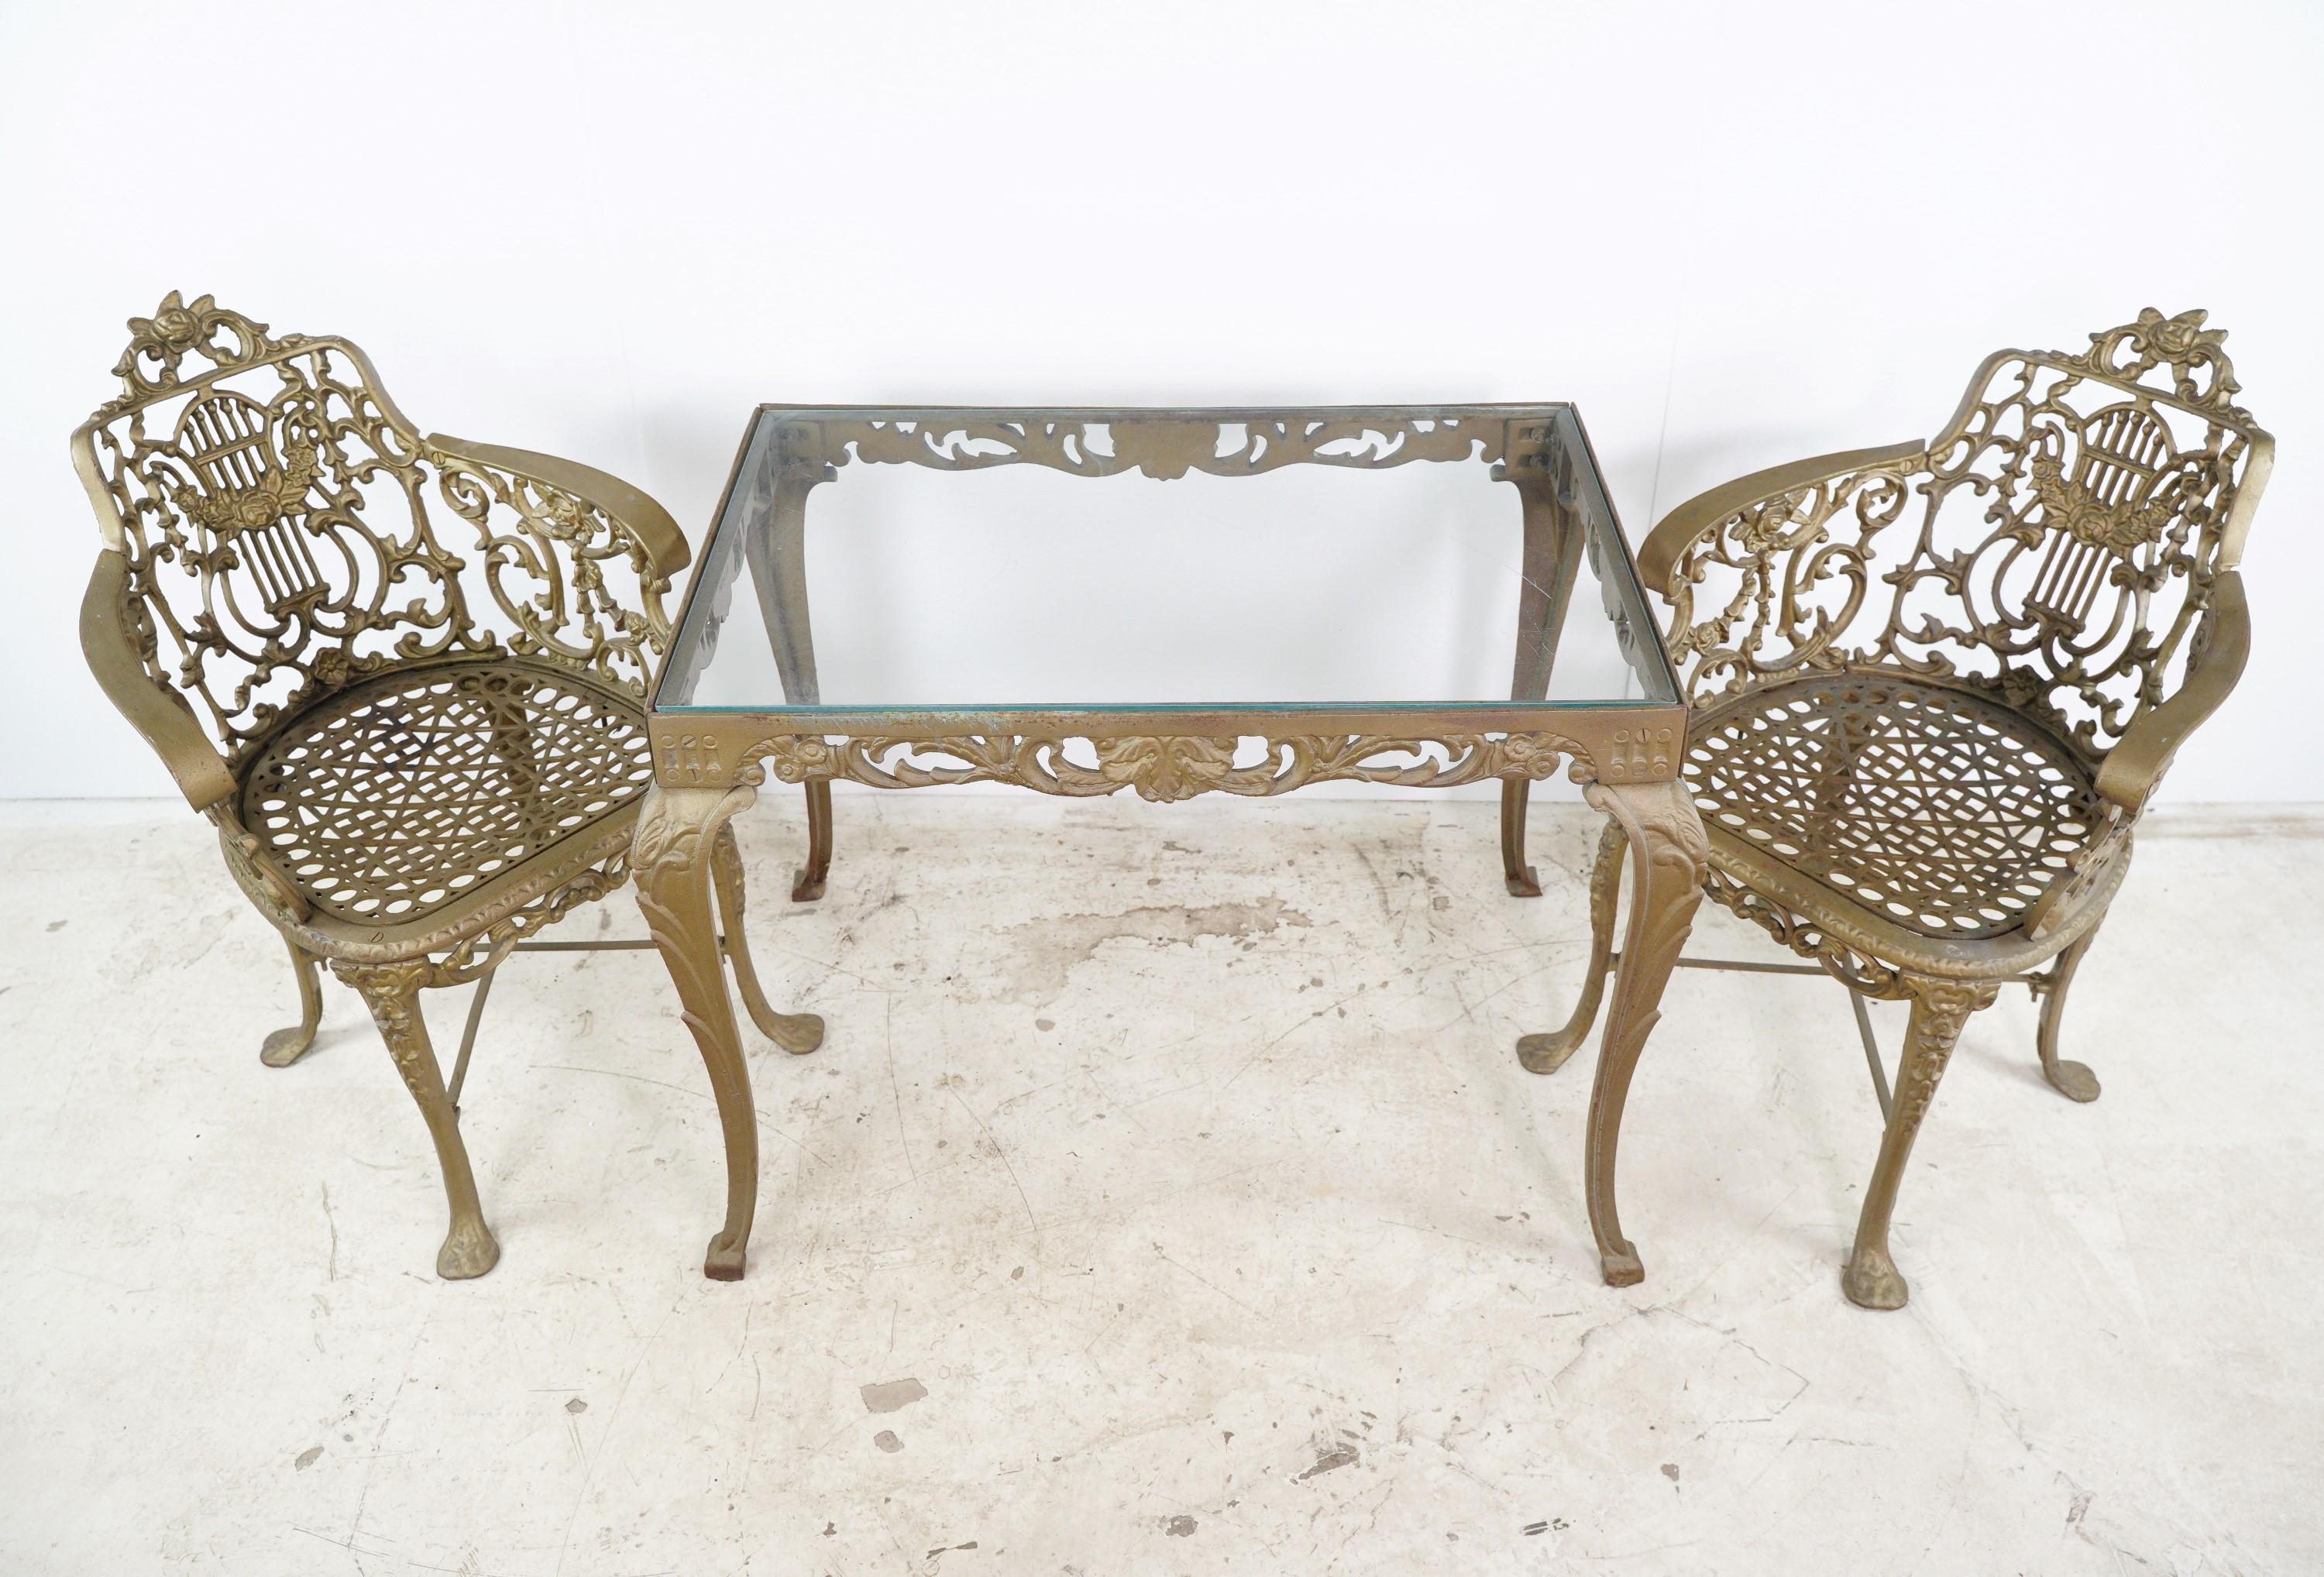 This heavy cast iron antique garden furniture set exudes timeless charm and durability, adding a touch of elegance to outdoor spaces. The table and chair set is made of old heavy cast iron with no breaks. The table glass has scratches, but